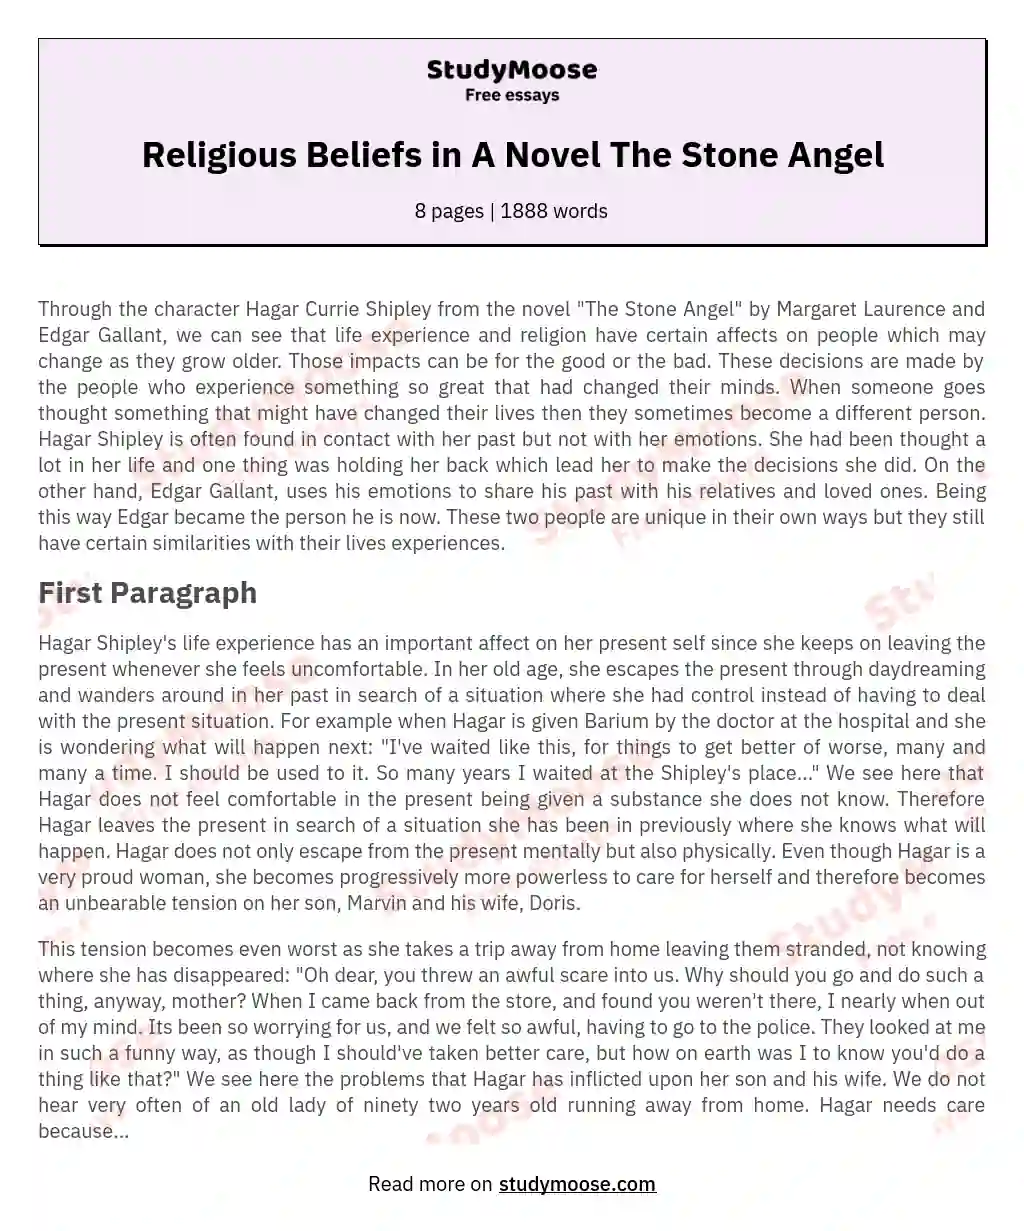 Religious Beliefs in A Novel The Stone Angel essay